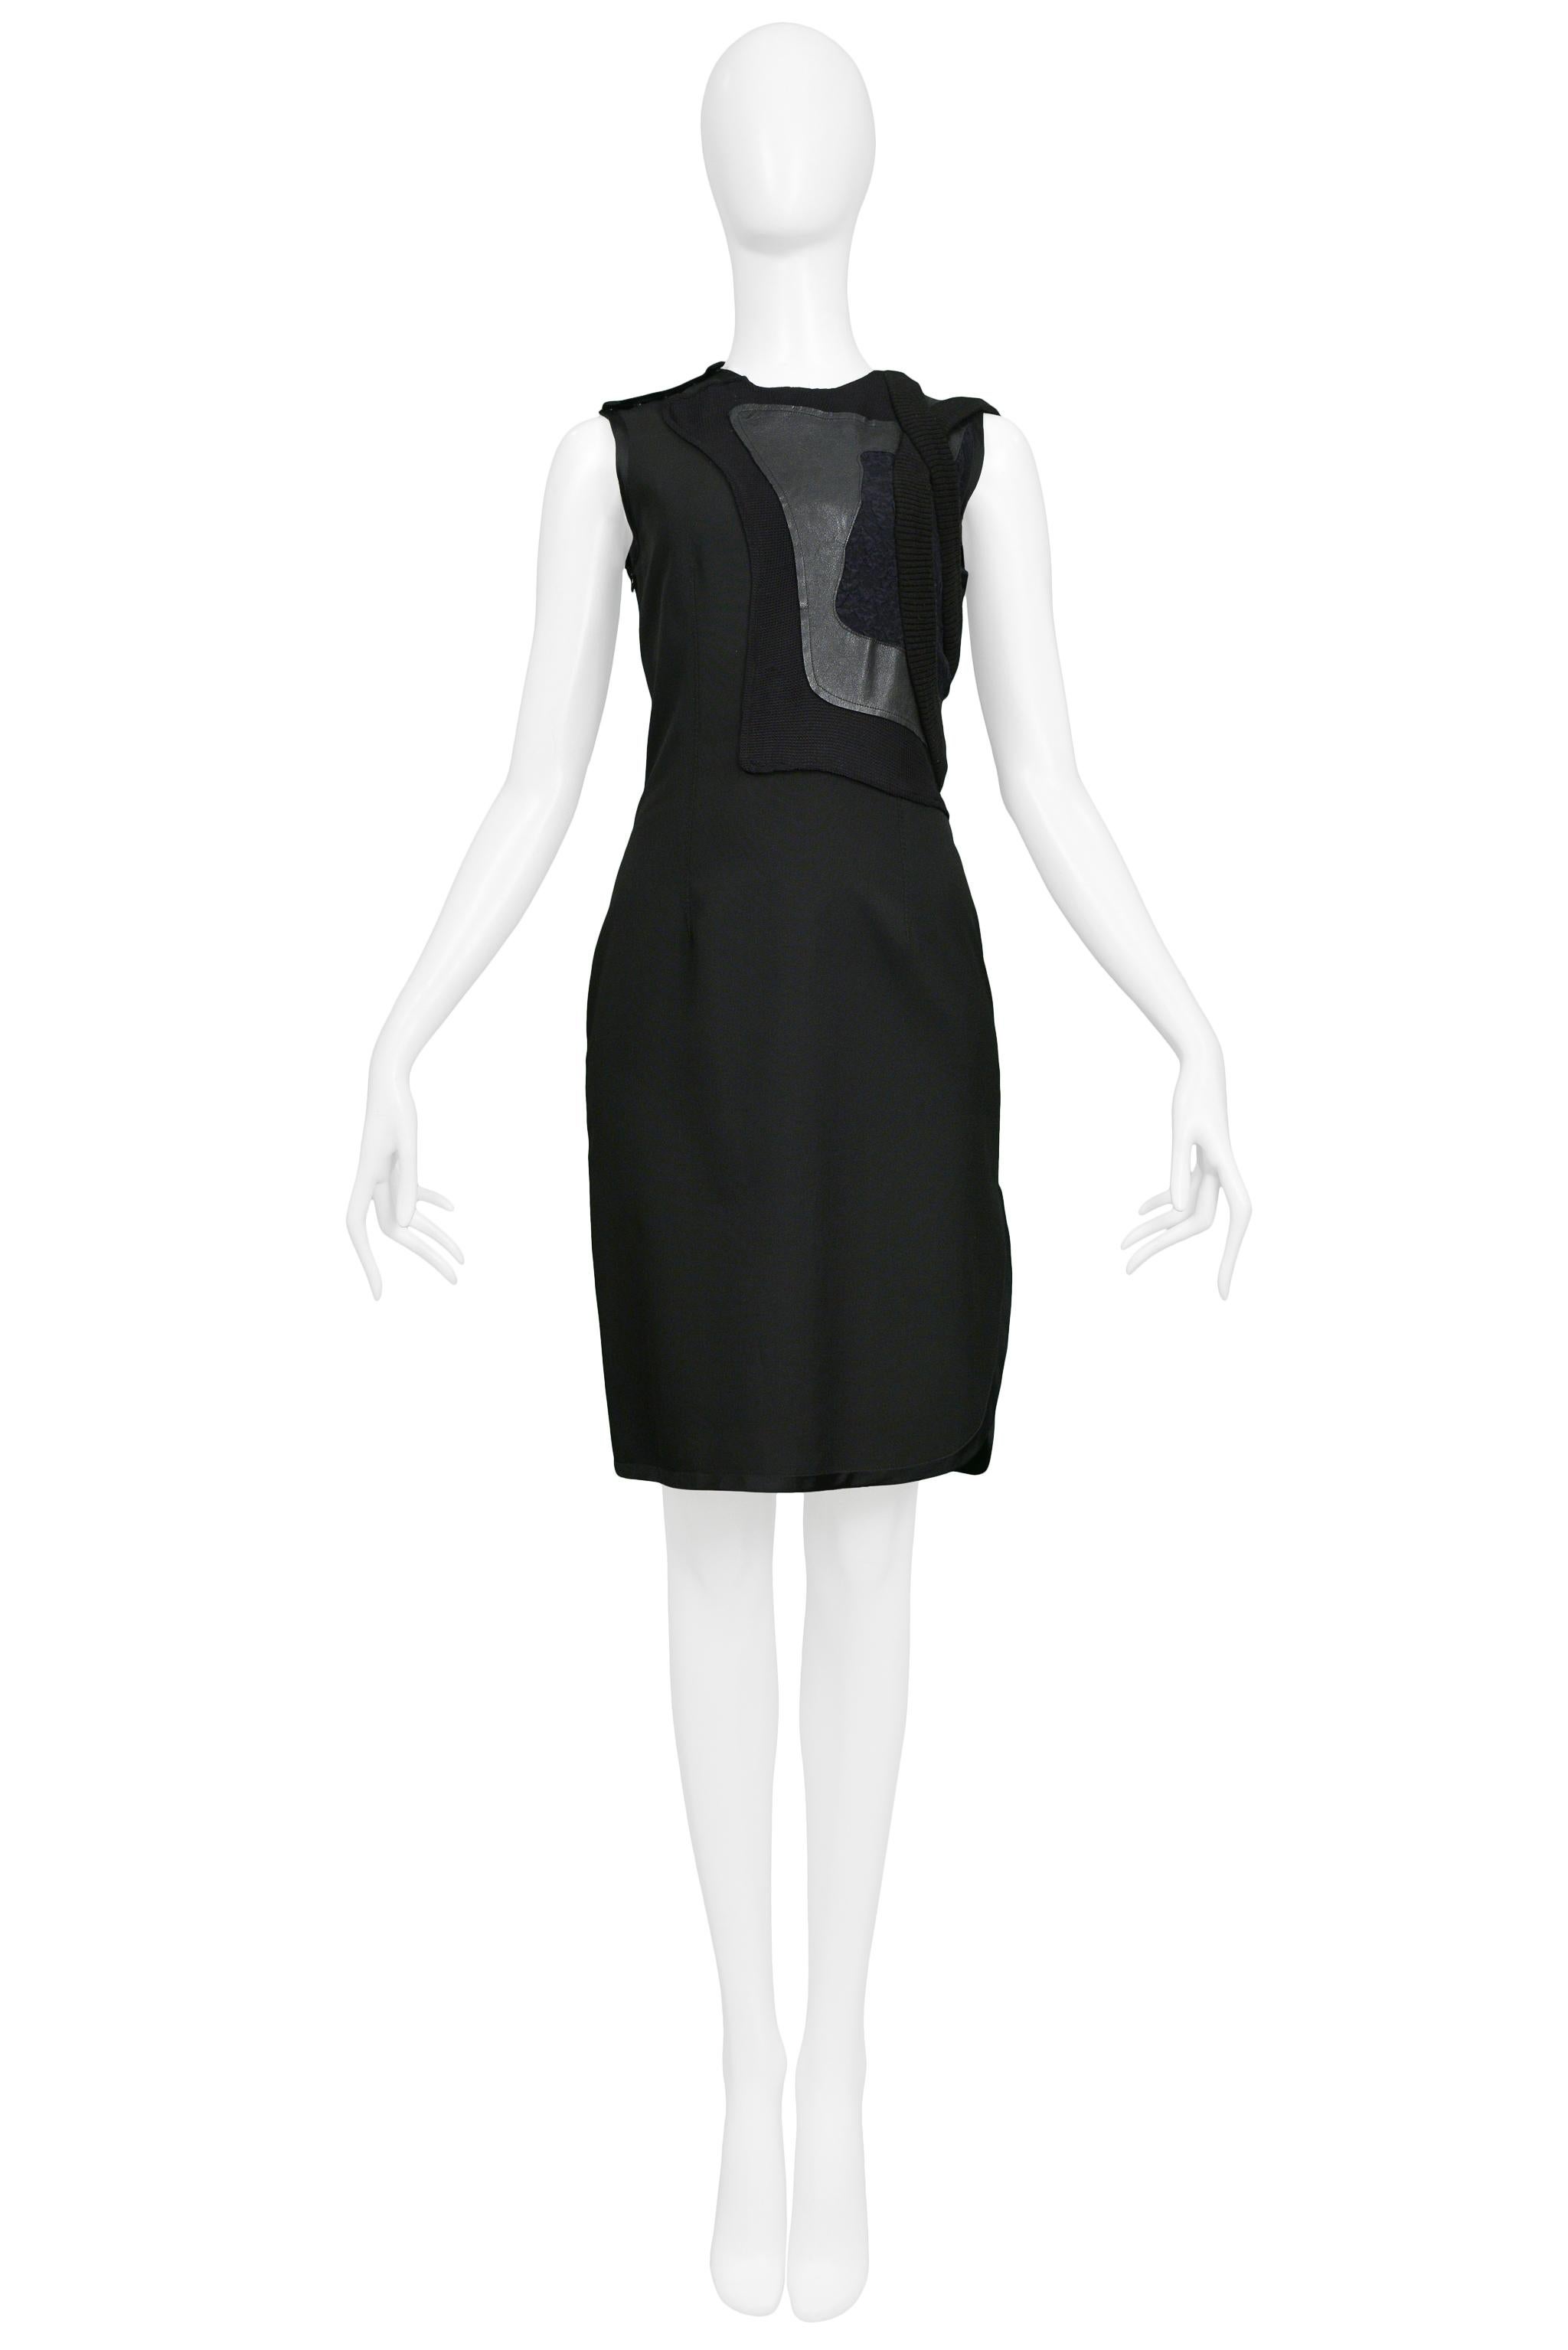 Resurrection Vintage is excited to offer a vintage Balenciaga by Nicolas Ghesquiere black sleeveless shift dress with multi-fabric and leather patchwork bodice, ribbed trim, and side zipper. Circa 1990s. 
Balenciaga Paris
Size 38
Measurements: Bust